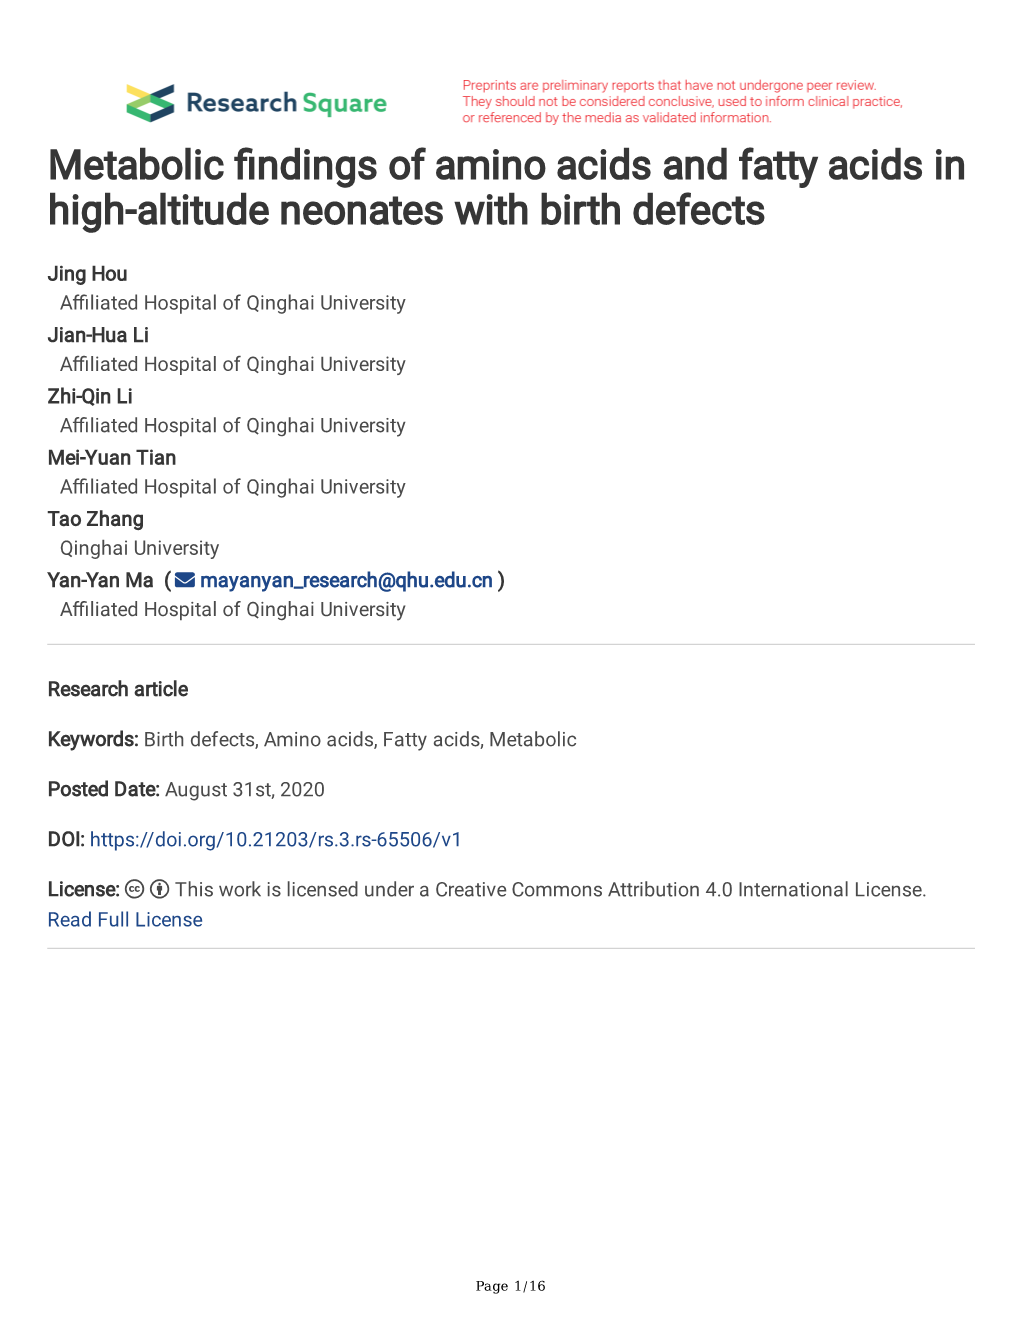 Metabolic Ndings of Amino Acids and Fatty Acids in High-Altitude Neonates